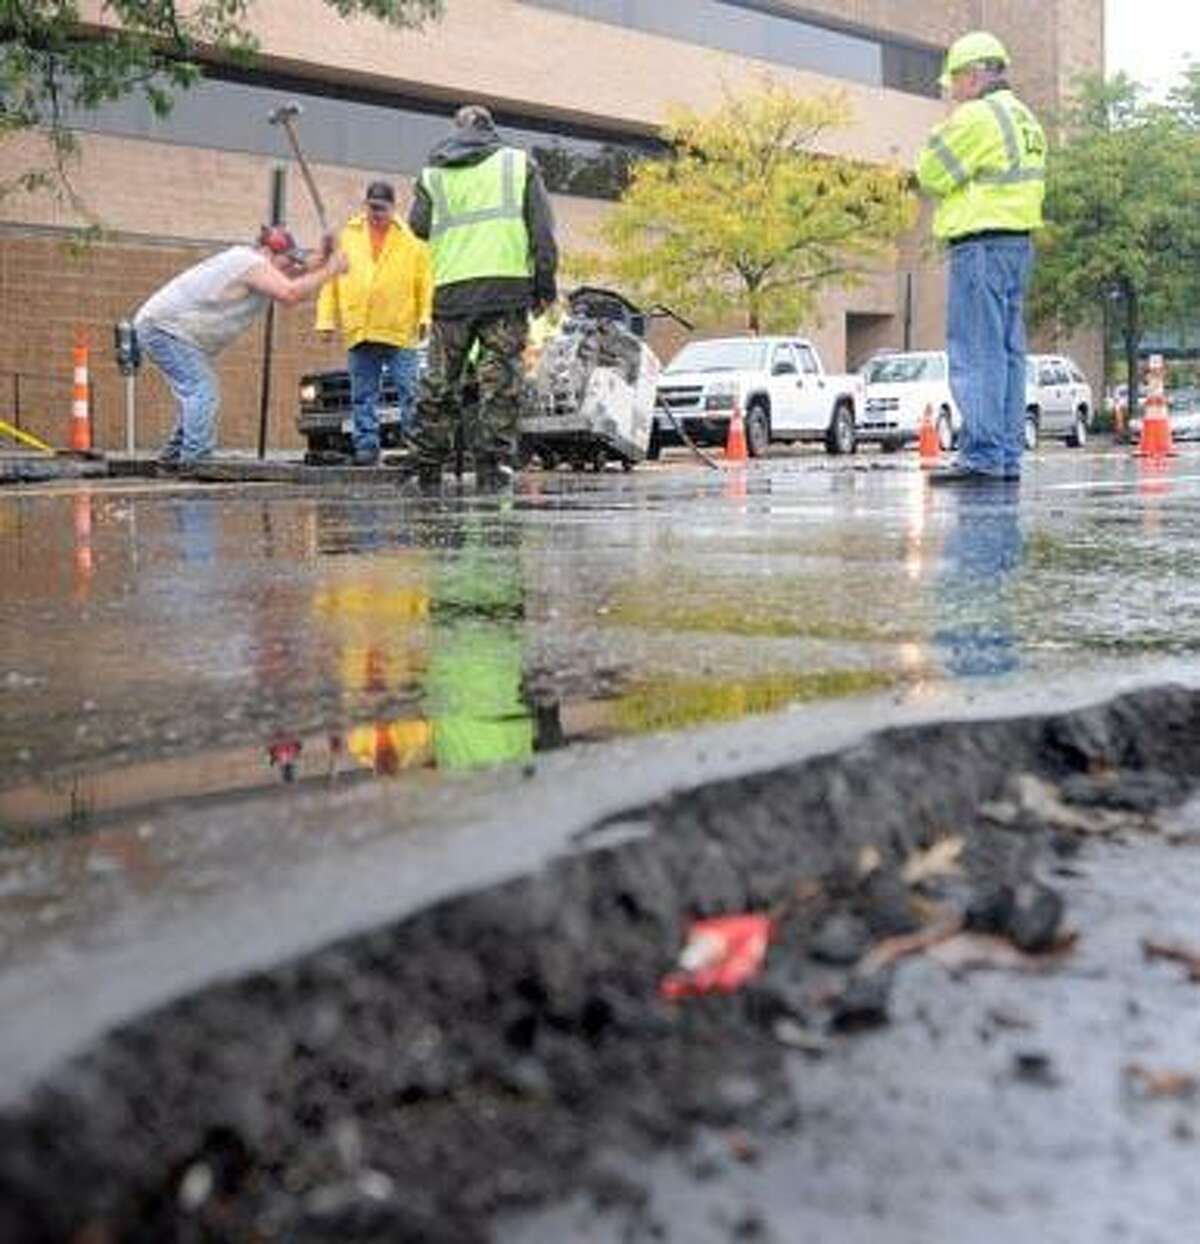 Connecticut DOT, New Haven Public Works Department and a private contractor rip up the road on Union Ave. in front of the Police department building and near Union Station Friday trying to find the cause of road heaves and flooding on Union Ave. (Peter Hvizdak/Register)